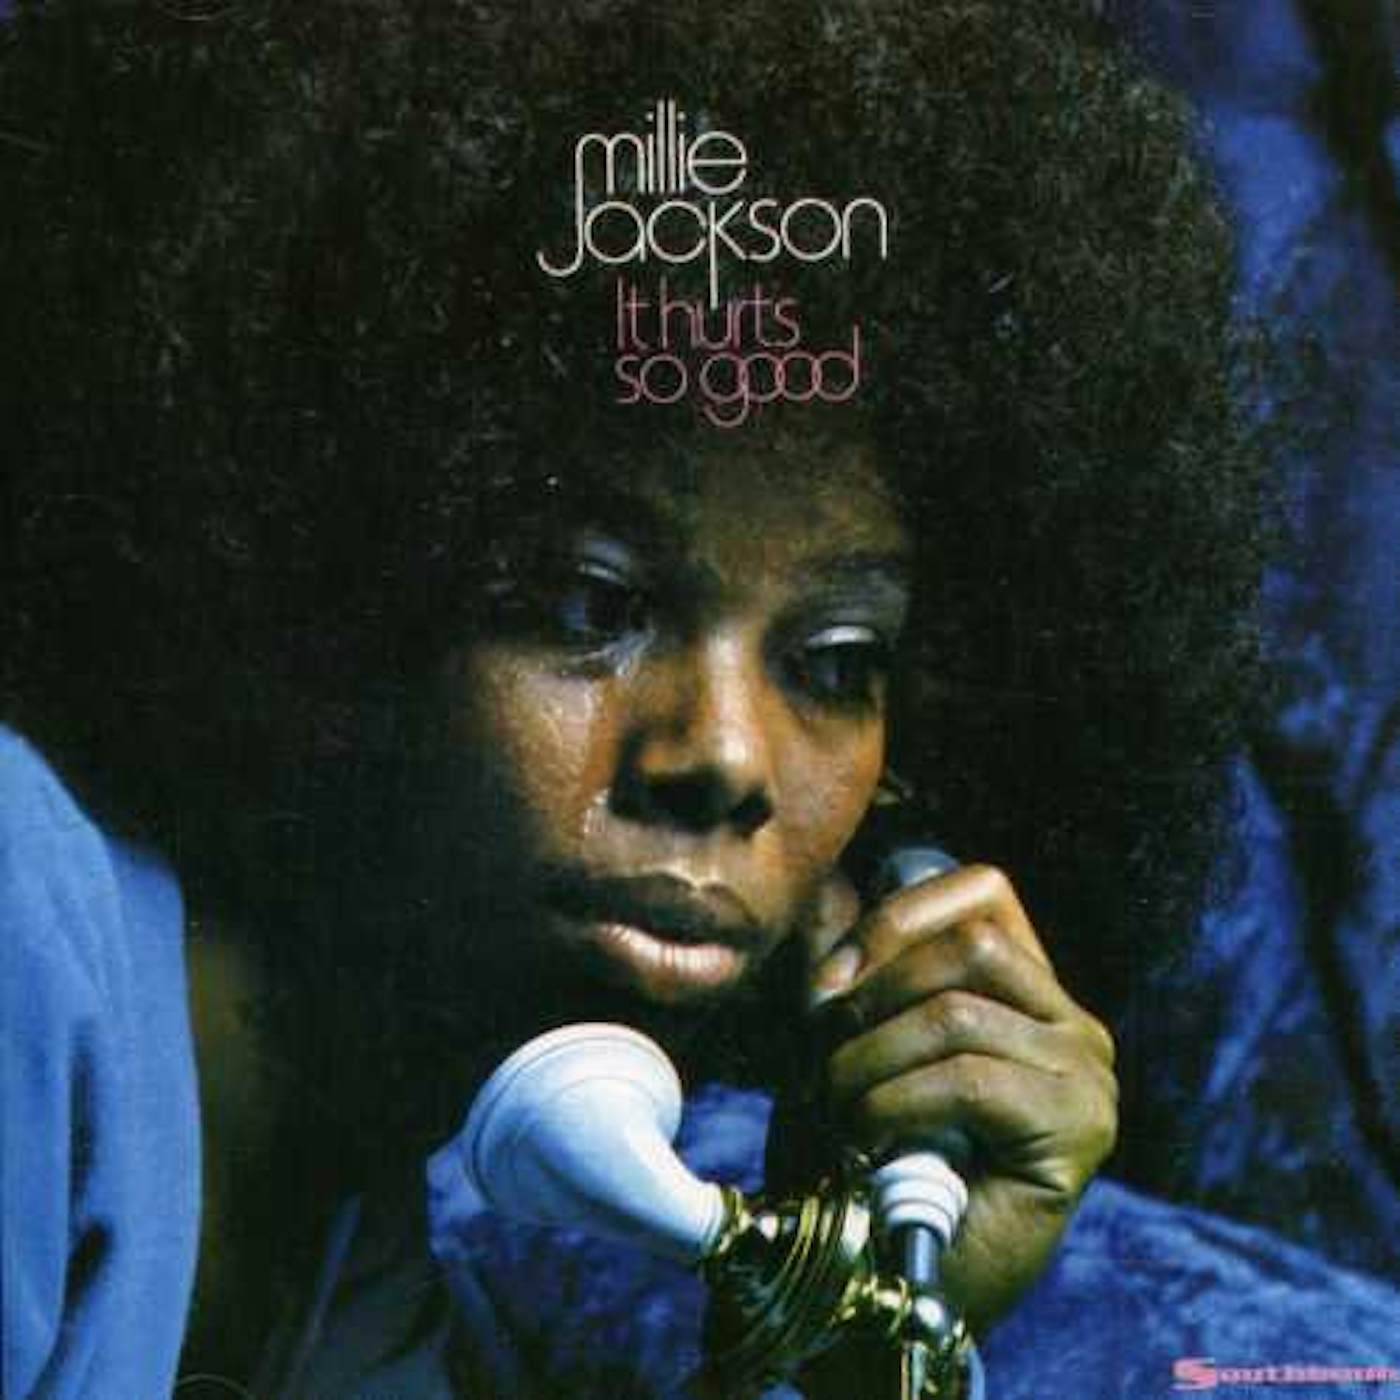 Millie Jackson IT HURTS SO GOOD (EXPANDED VERSION) CD